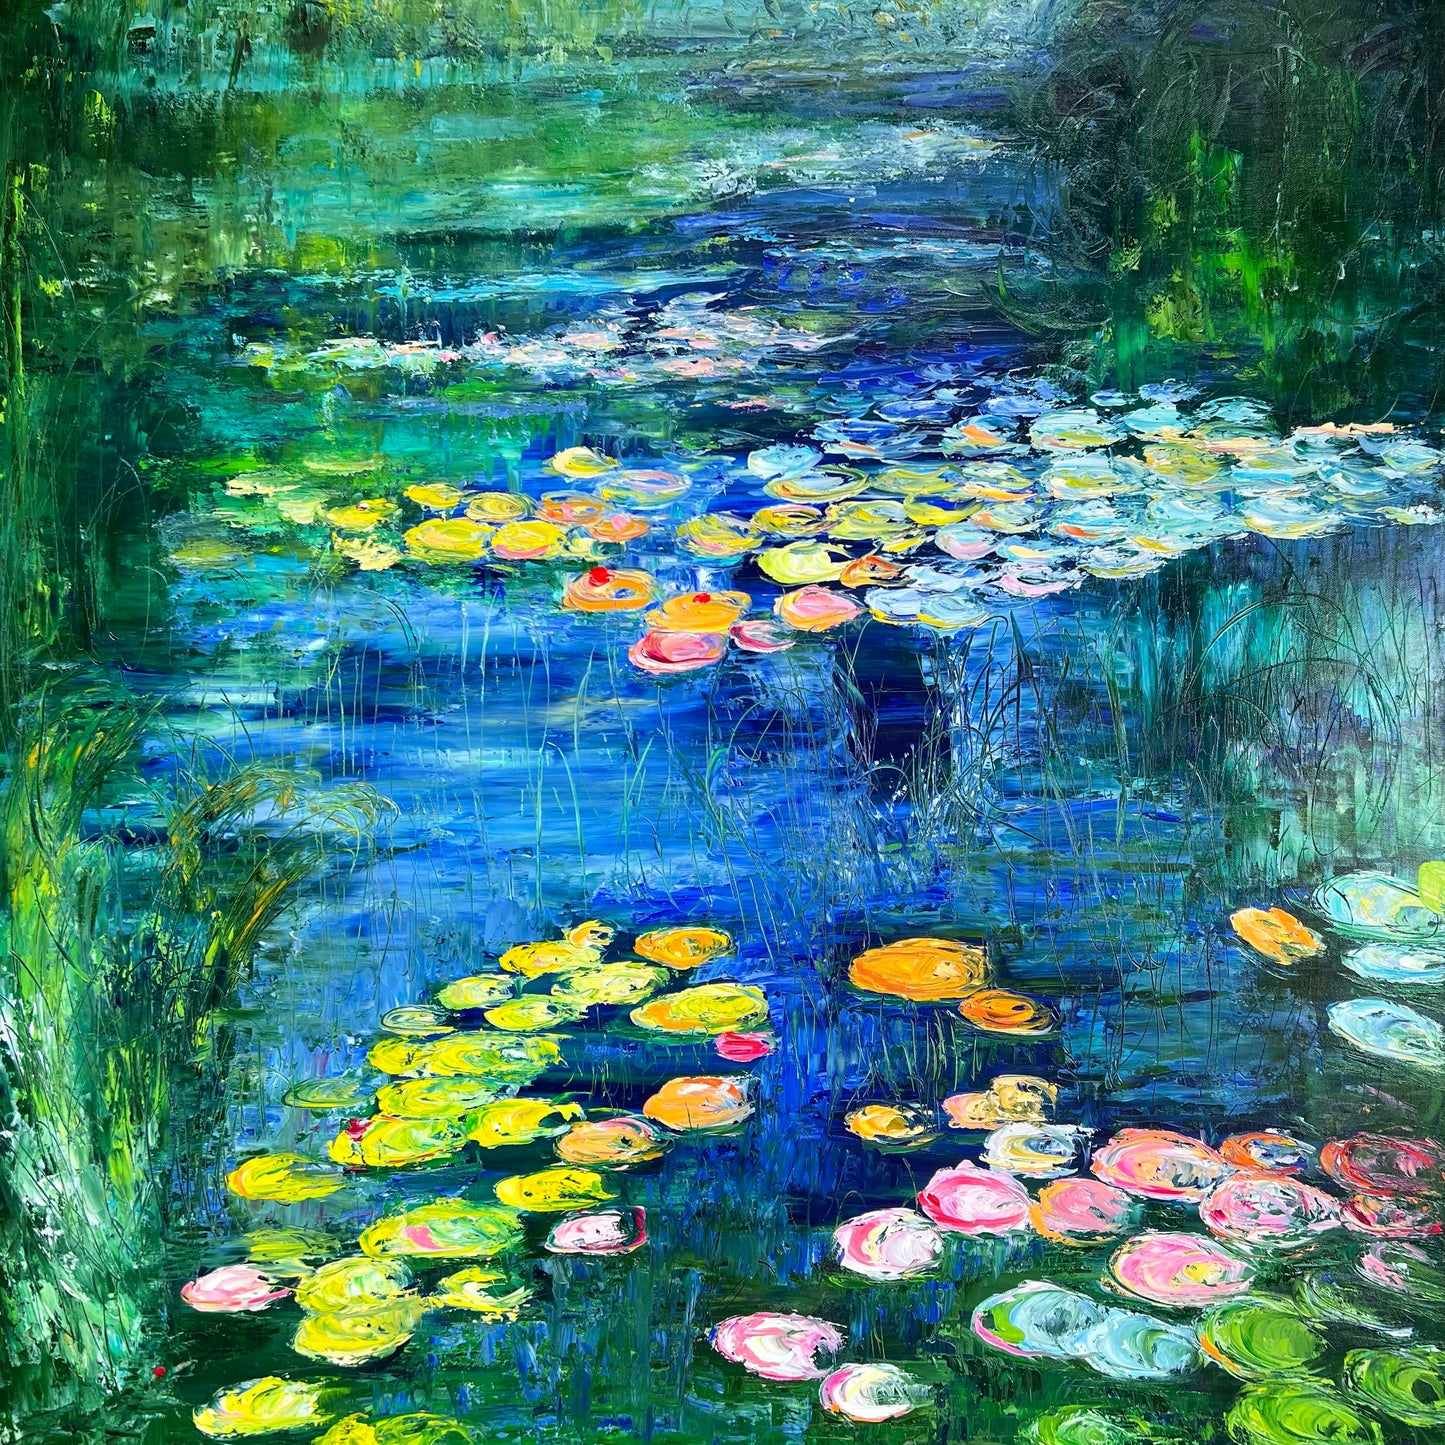 Water Lily Pond II, OIL, 36" X 36"